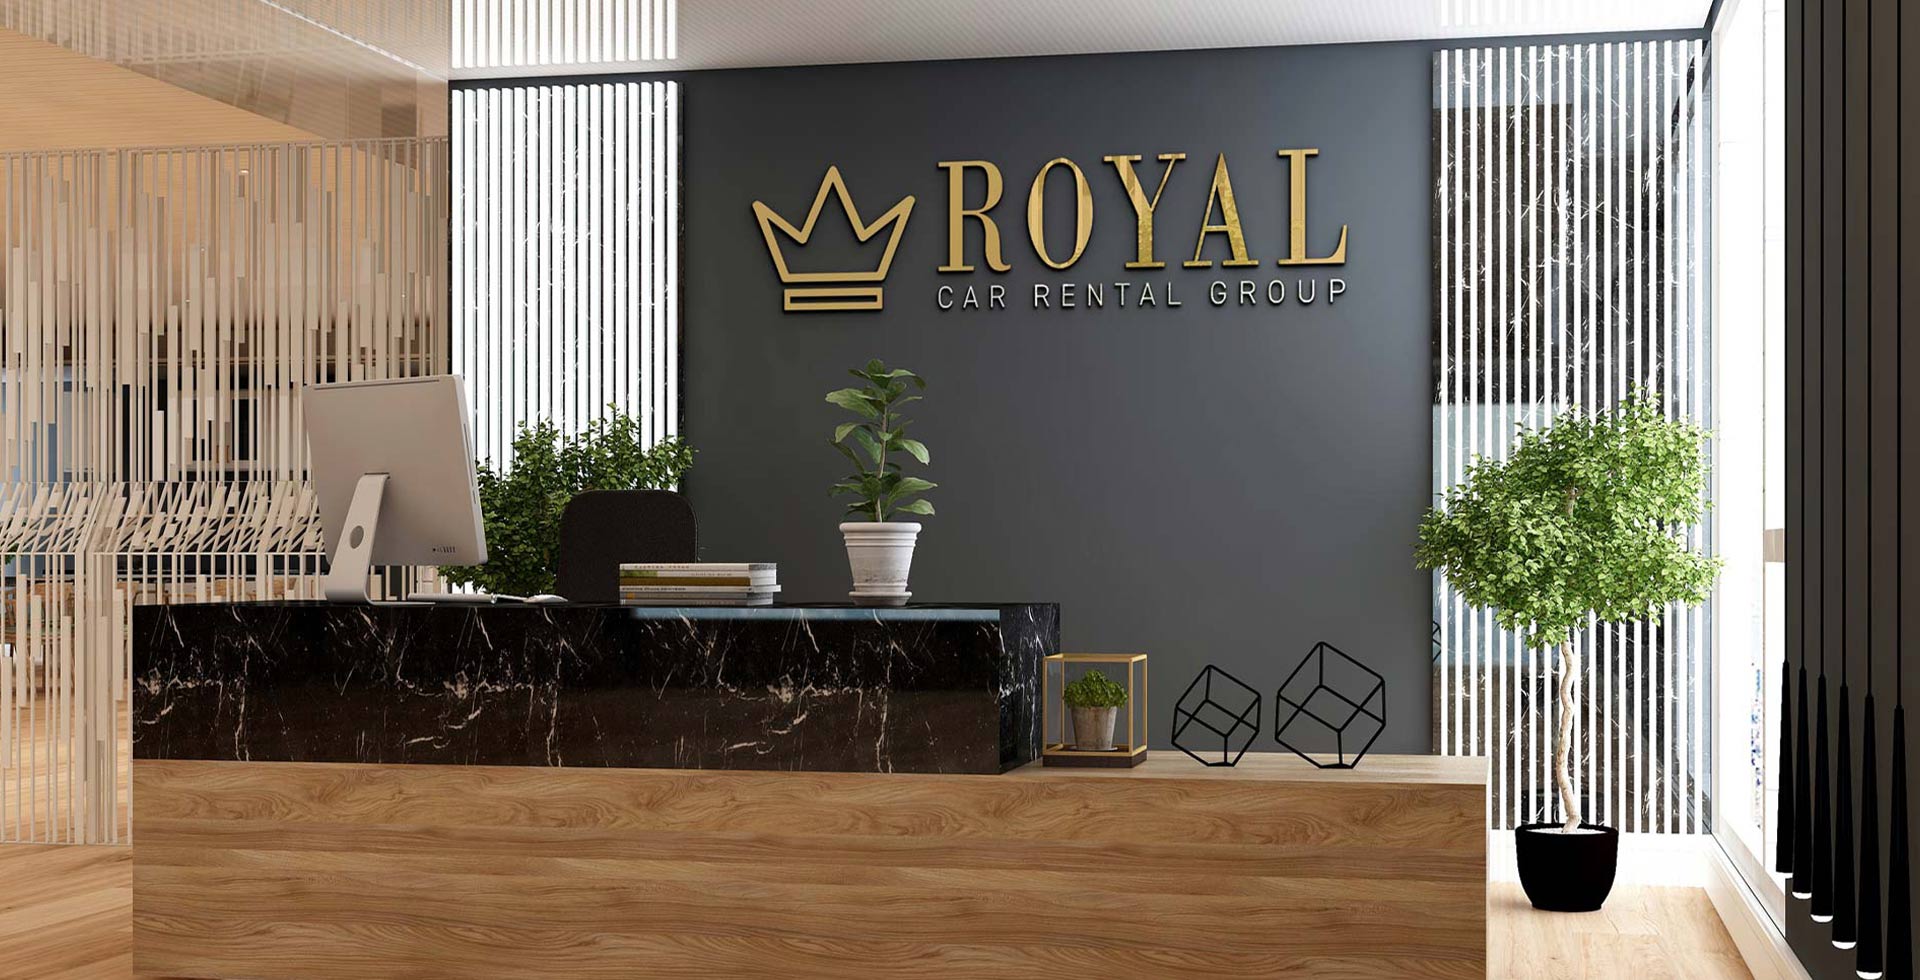 Royal Car Rental Group | Franchising Initial Inquiry Form